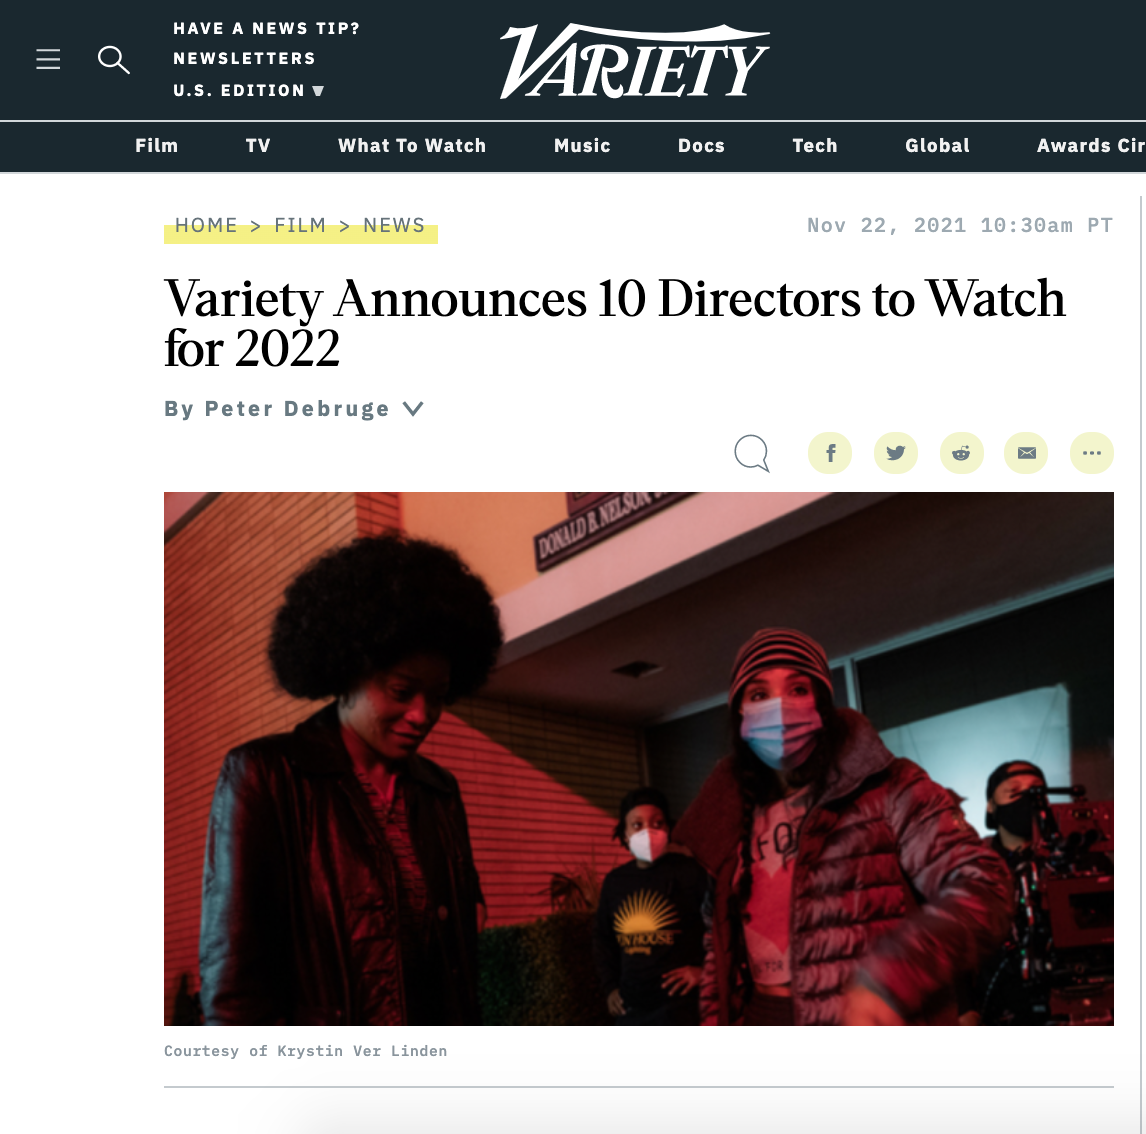 Screenshot of the Variety article naming their 10 Directors to watch in 2022